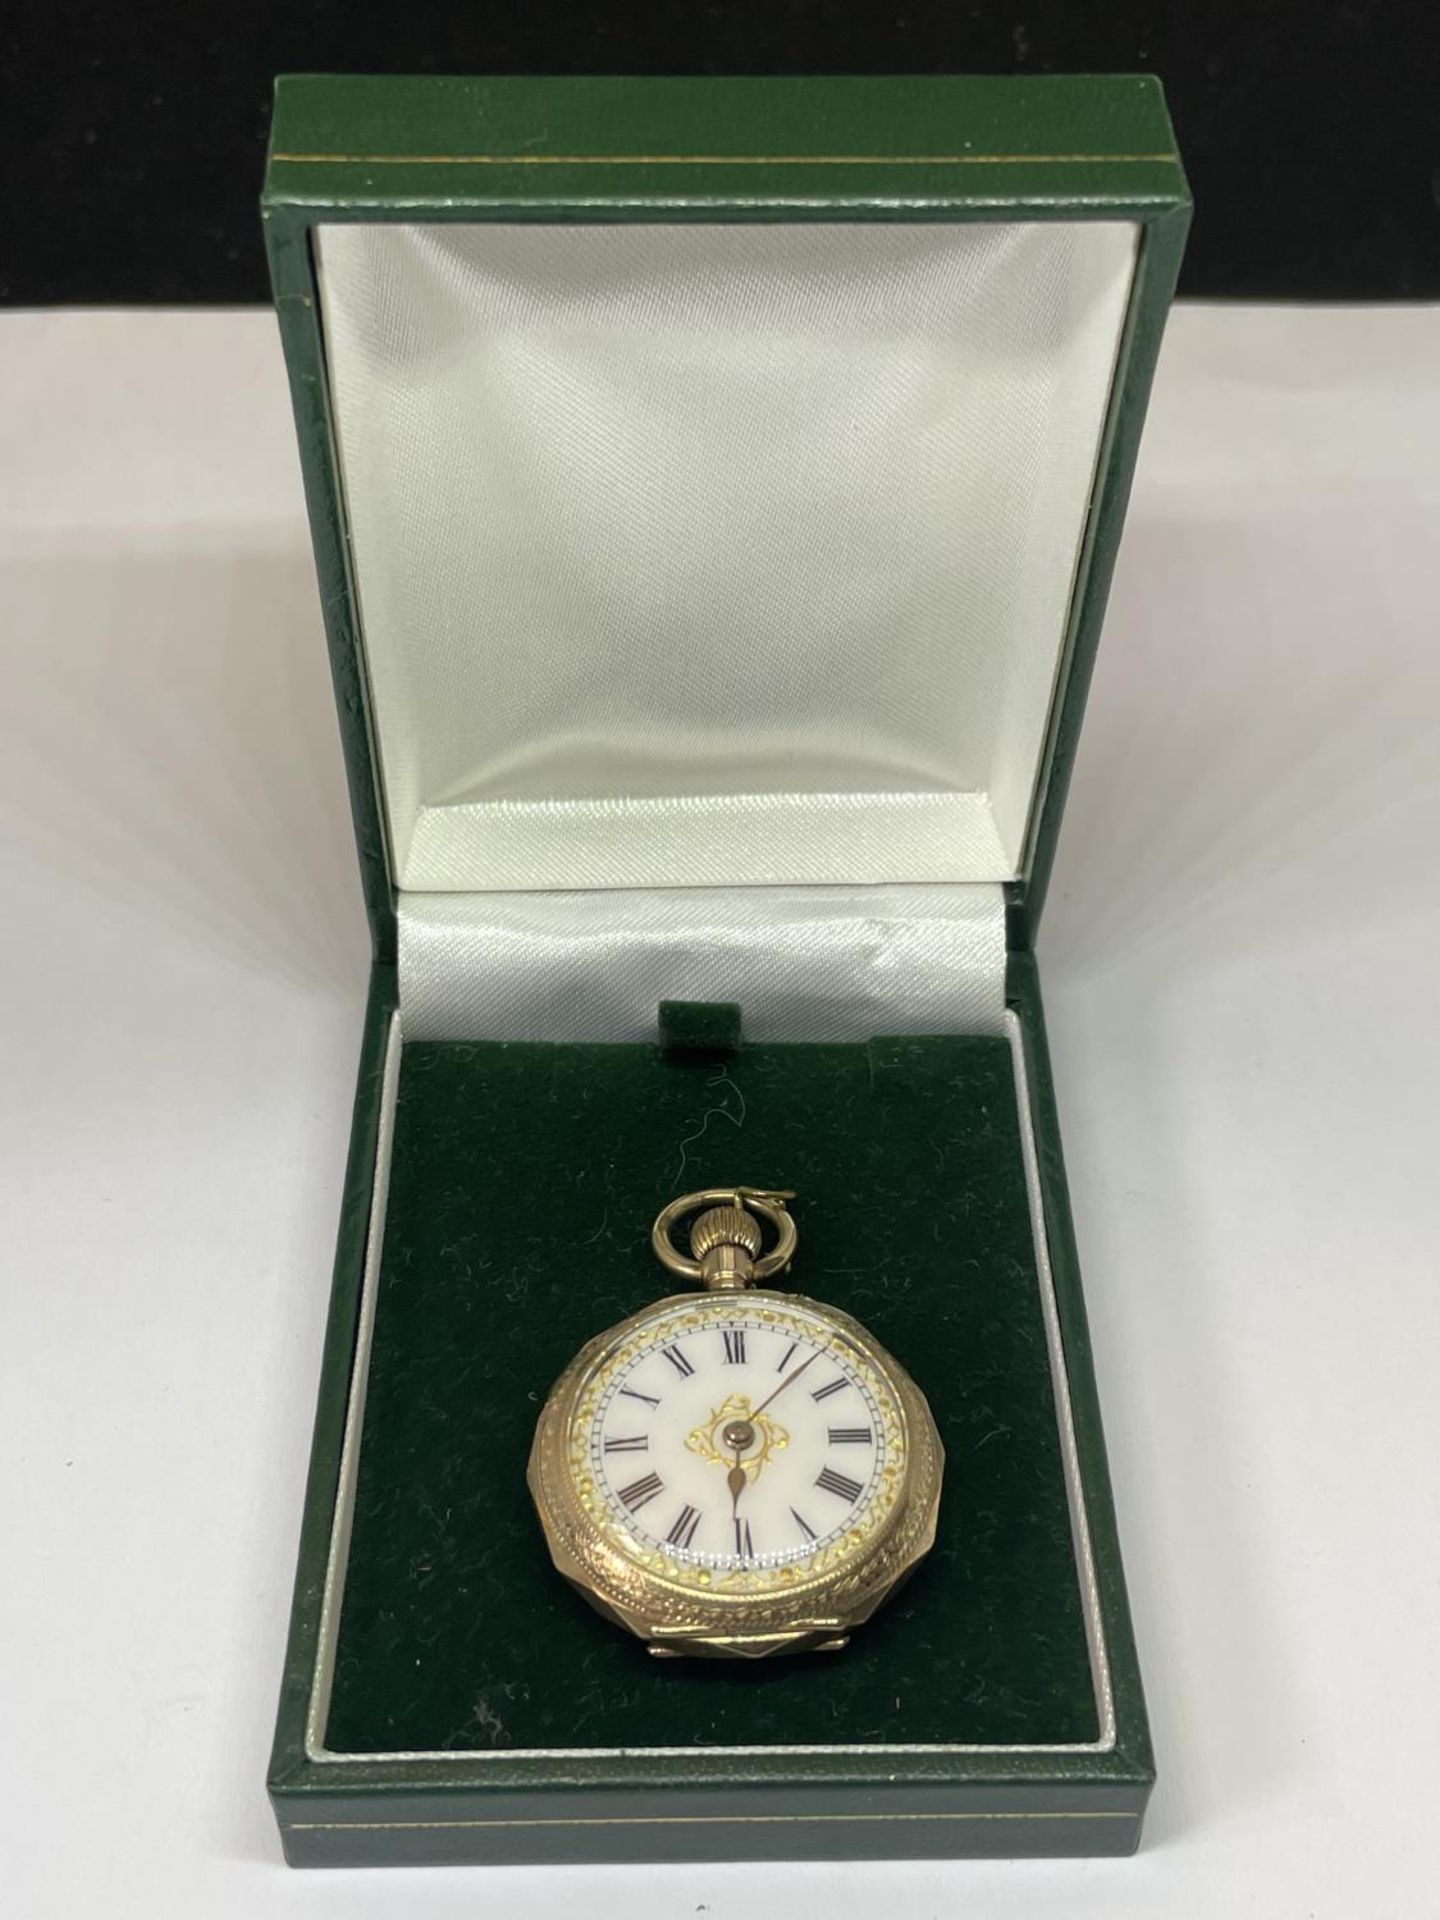 A 9 CARAT GOLD MARKED 9K LADIES POCKET WATCH SEEN WORKING BUT NO WARRANTY IN A PRESENTATION BOX - Image 6 of 6